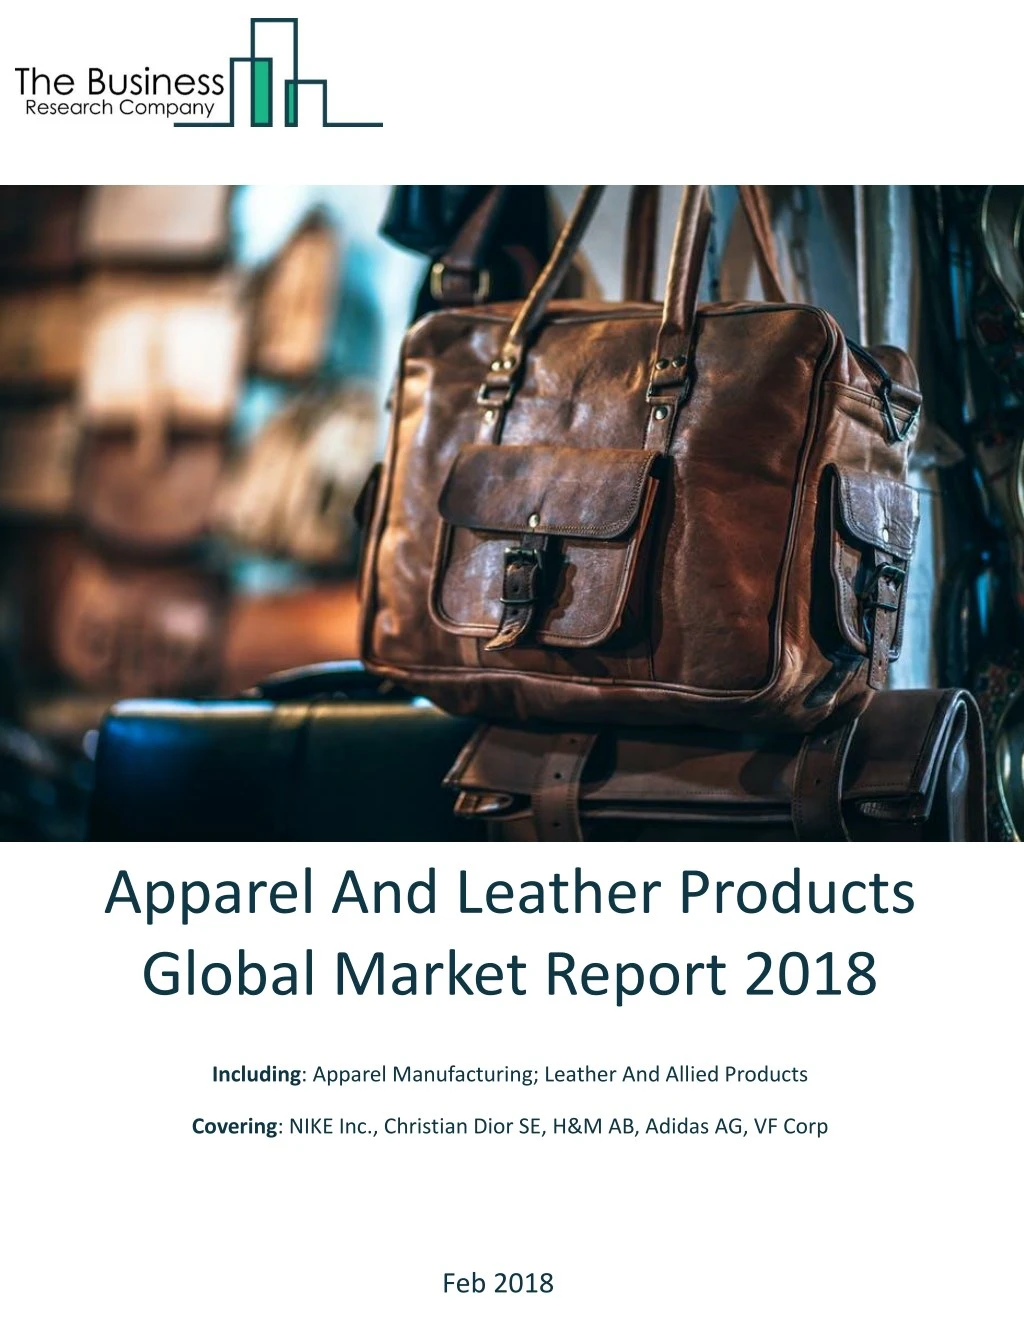 apparel and leather products global market report